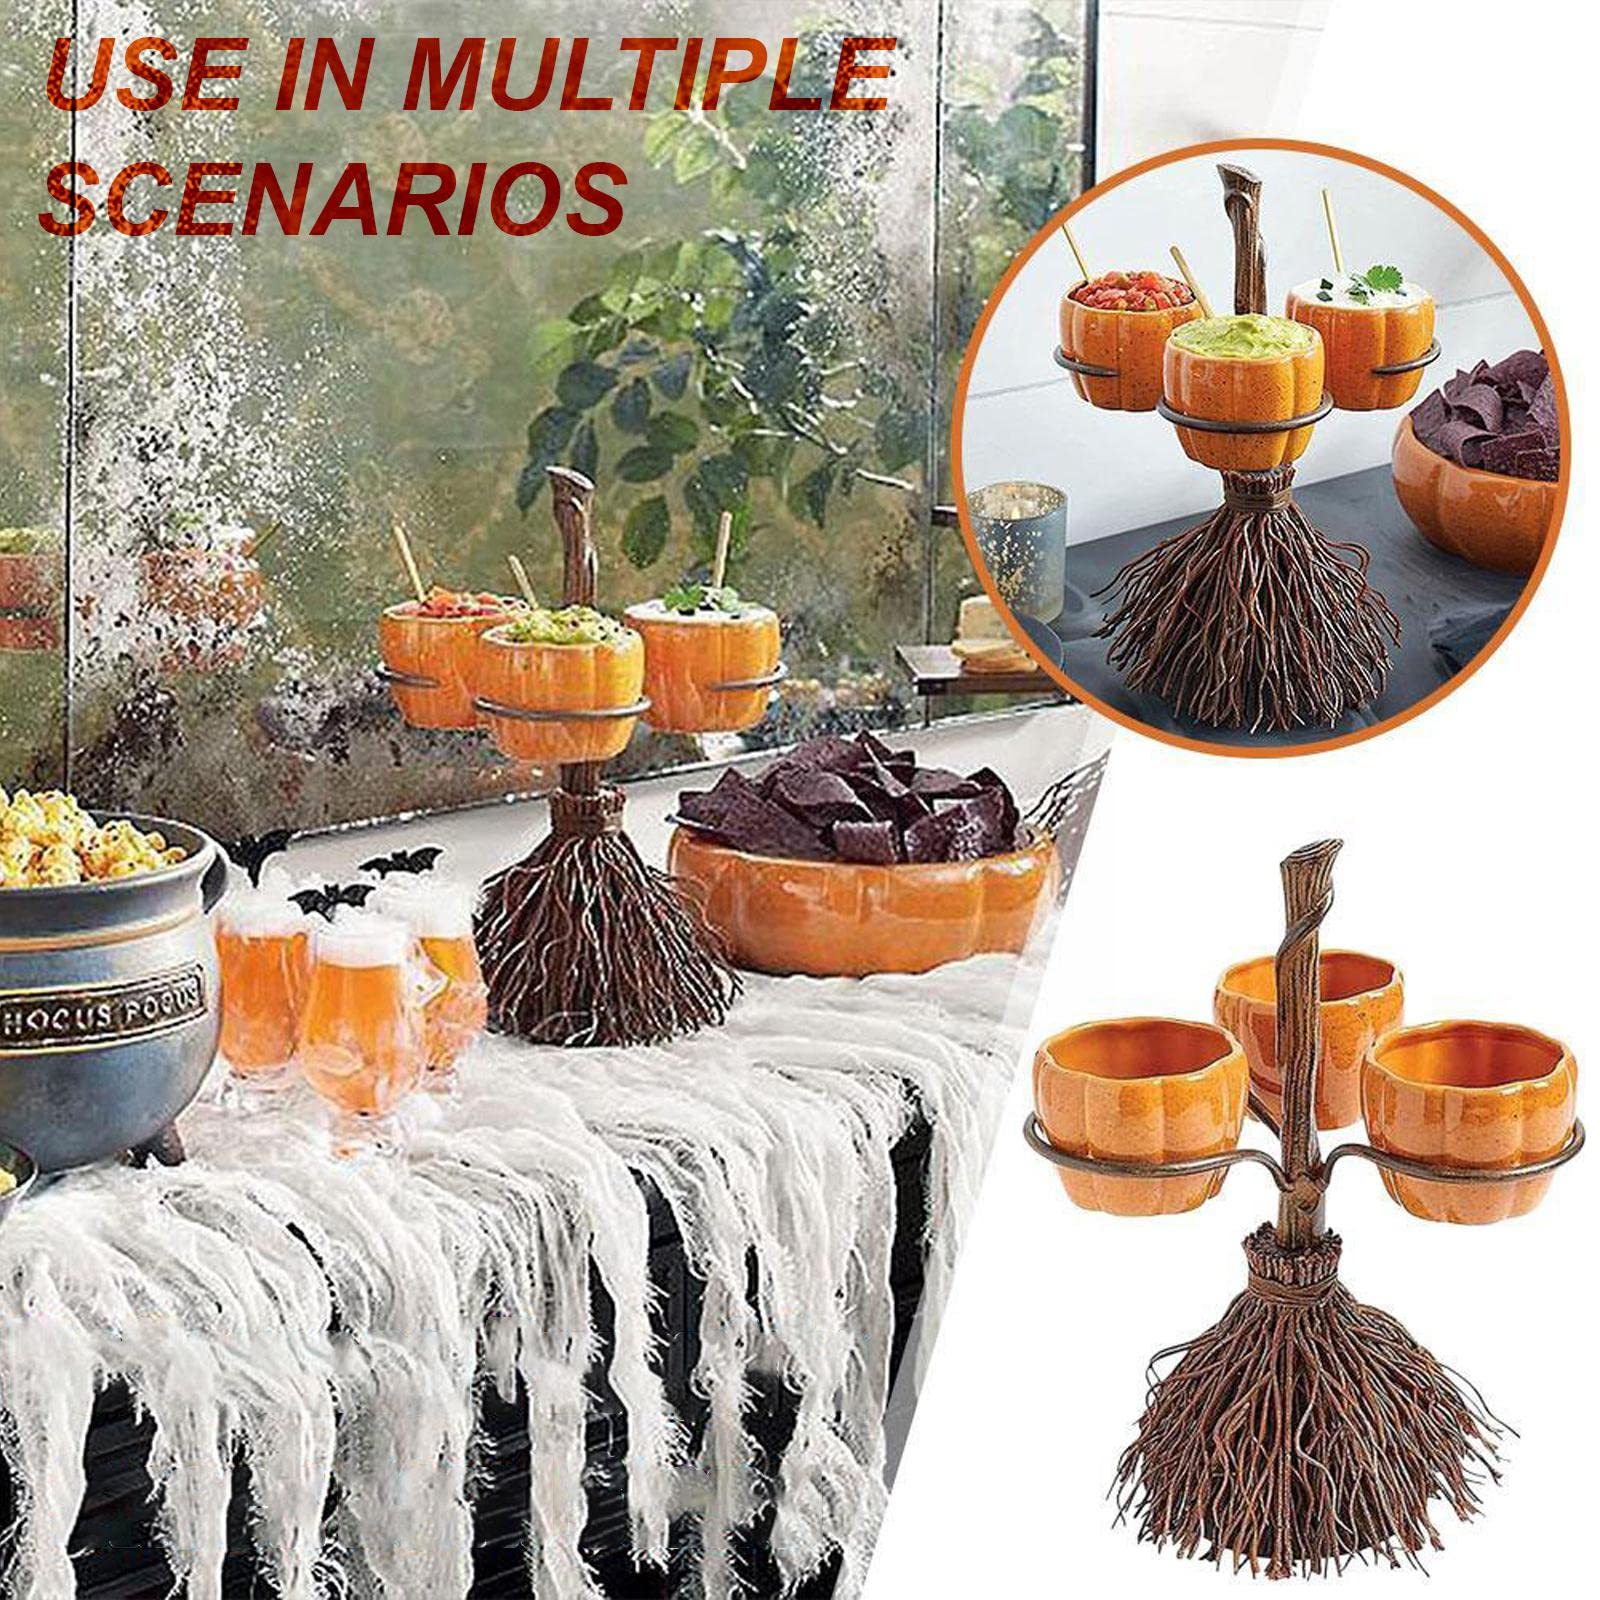 Creative Witches Broom Rack with Pumpkin Bowl